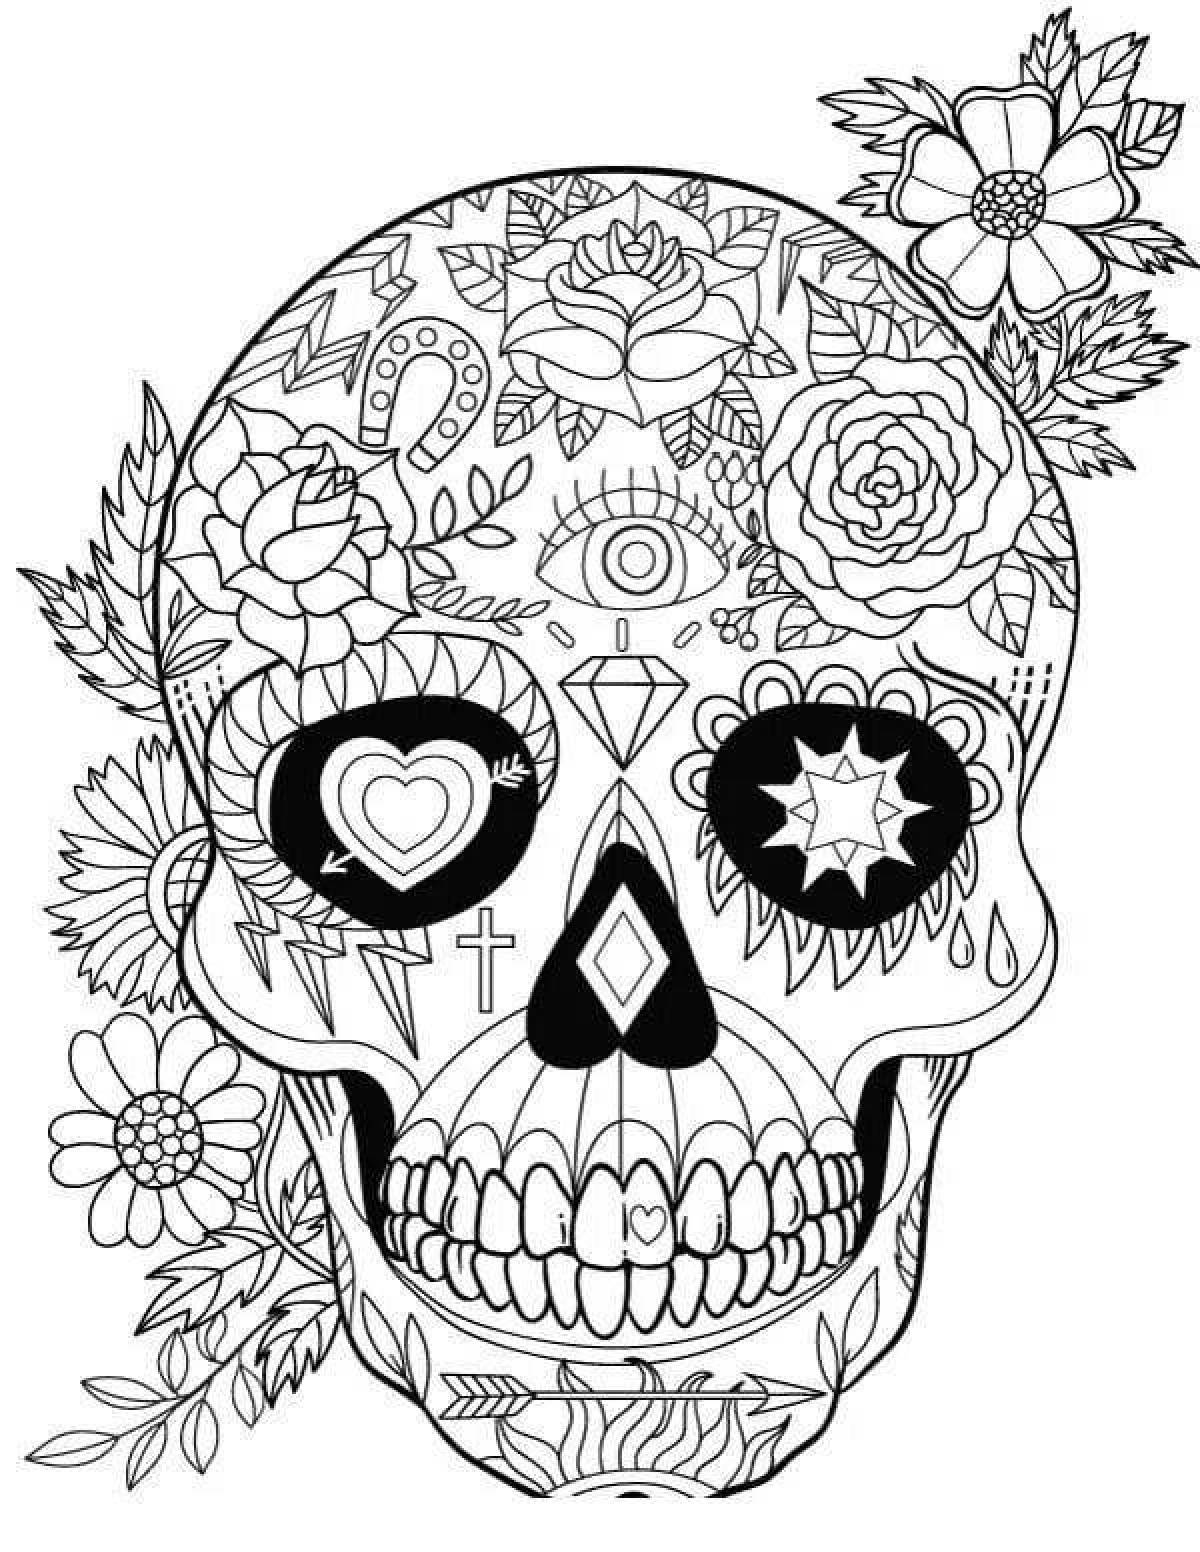 Coloring page is scary but beautiful: hauntingly beautiful